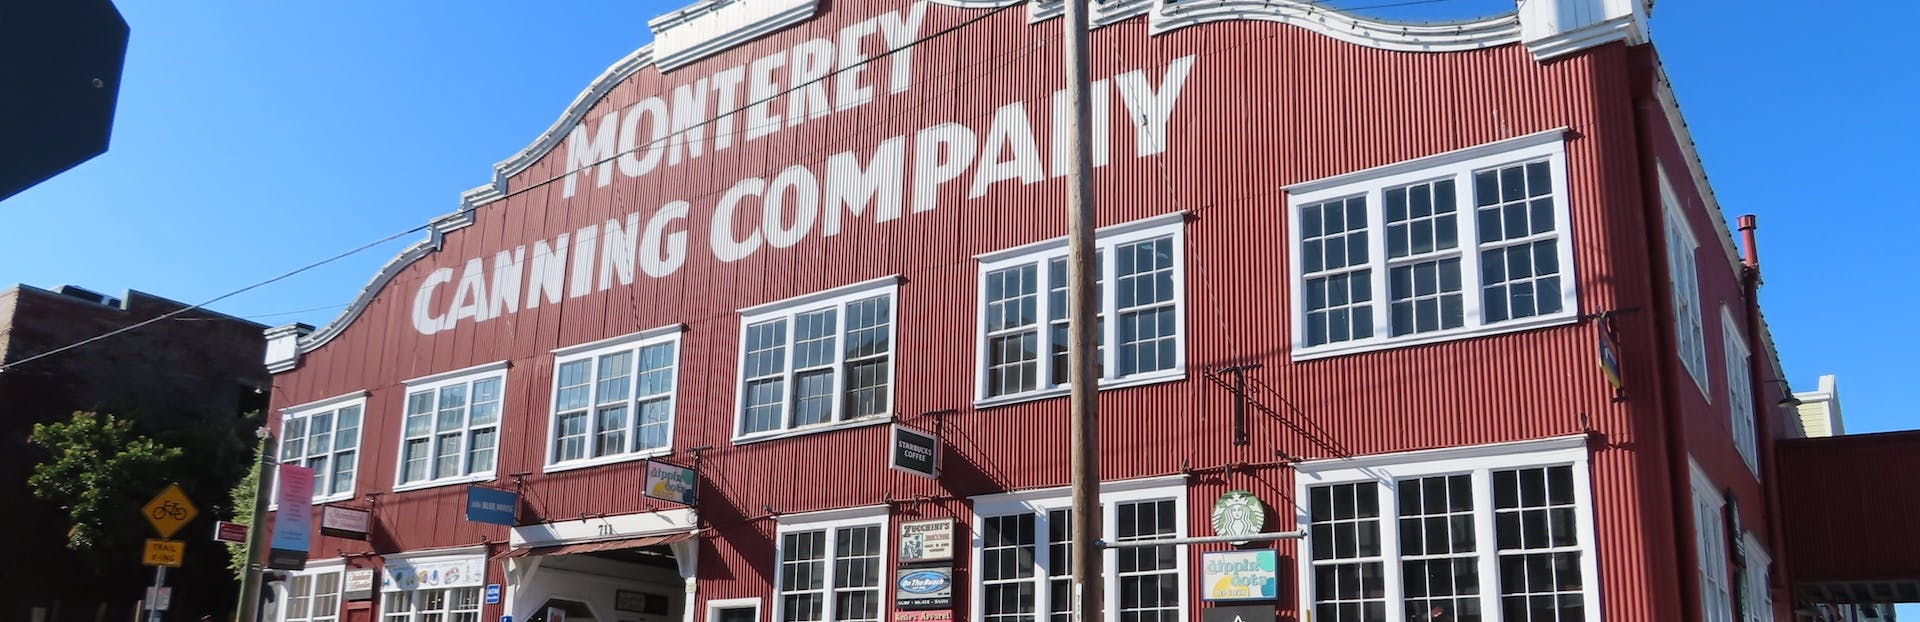 Monterey historic Cannery Row and John Steinbeck self guided audio tour Musement